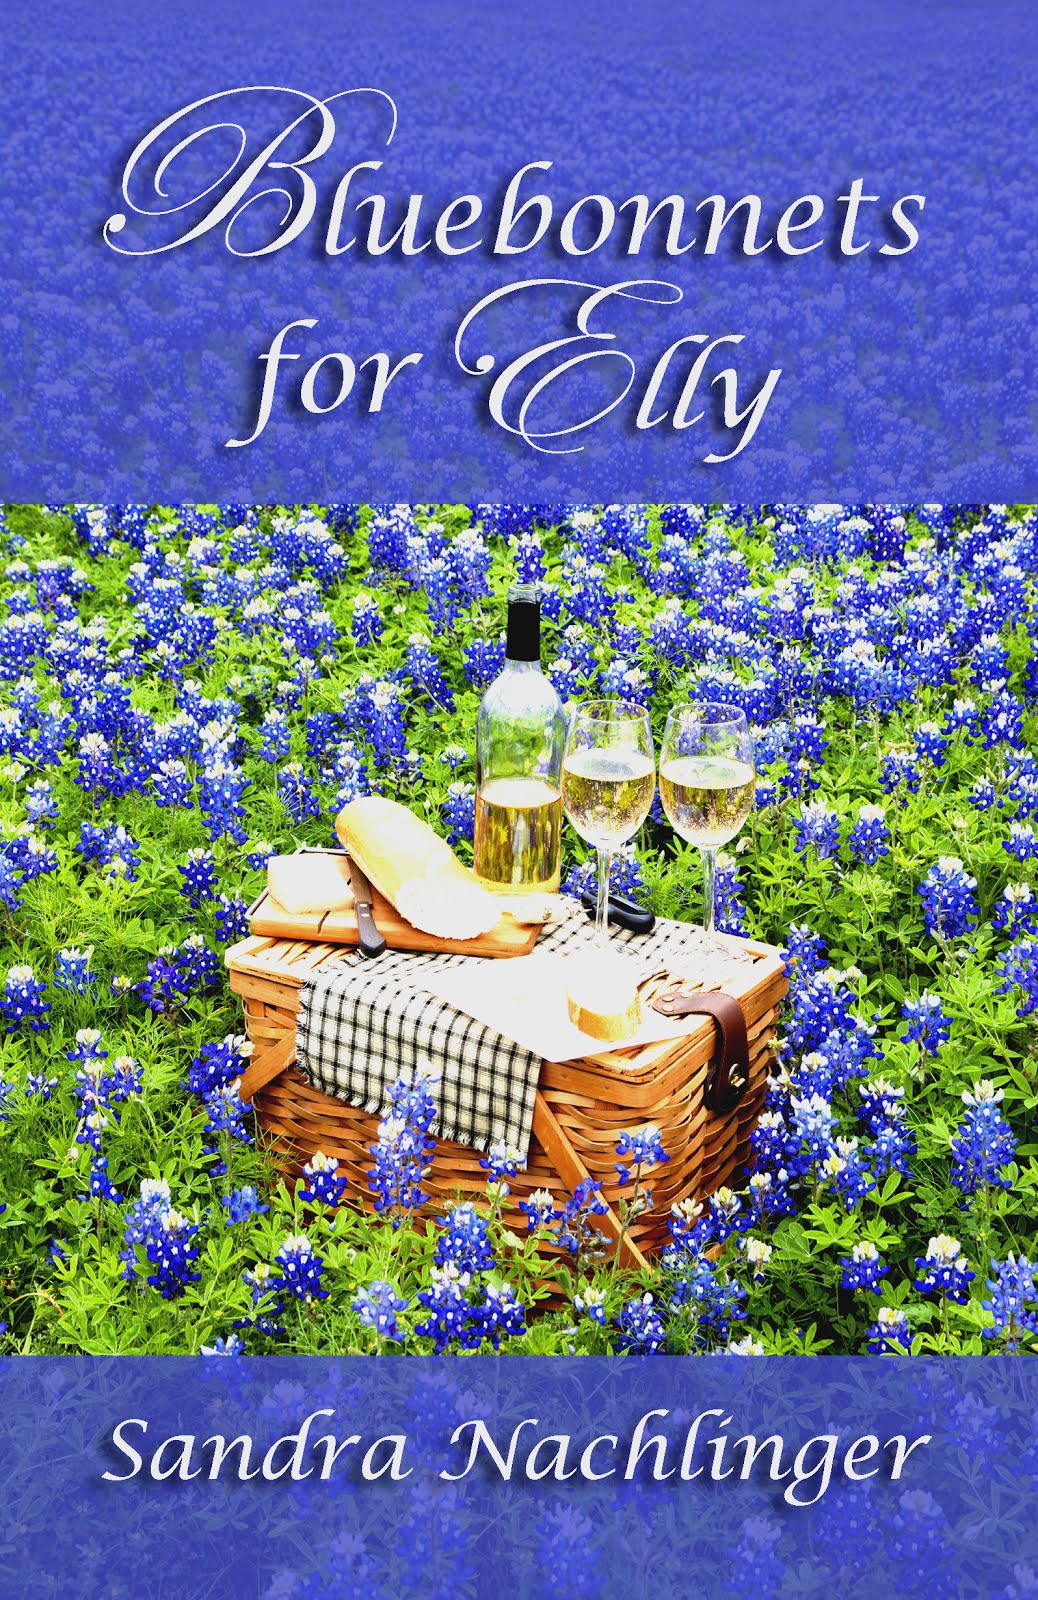 My sweet Texas romance - in paperback and ebook formats